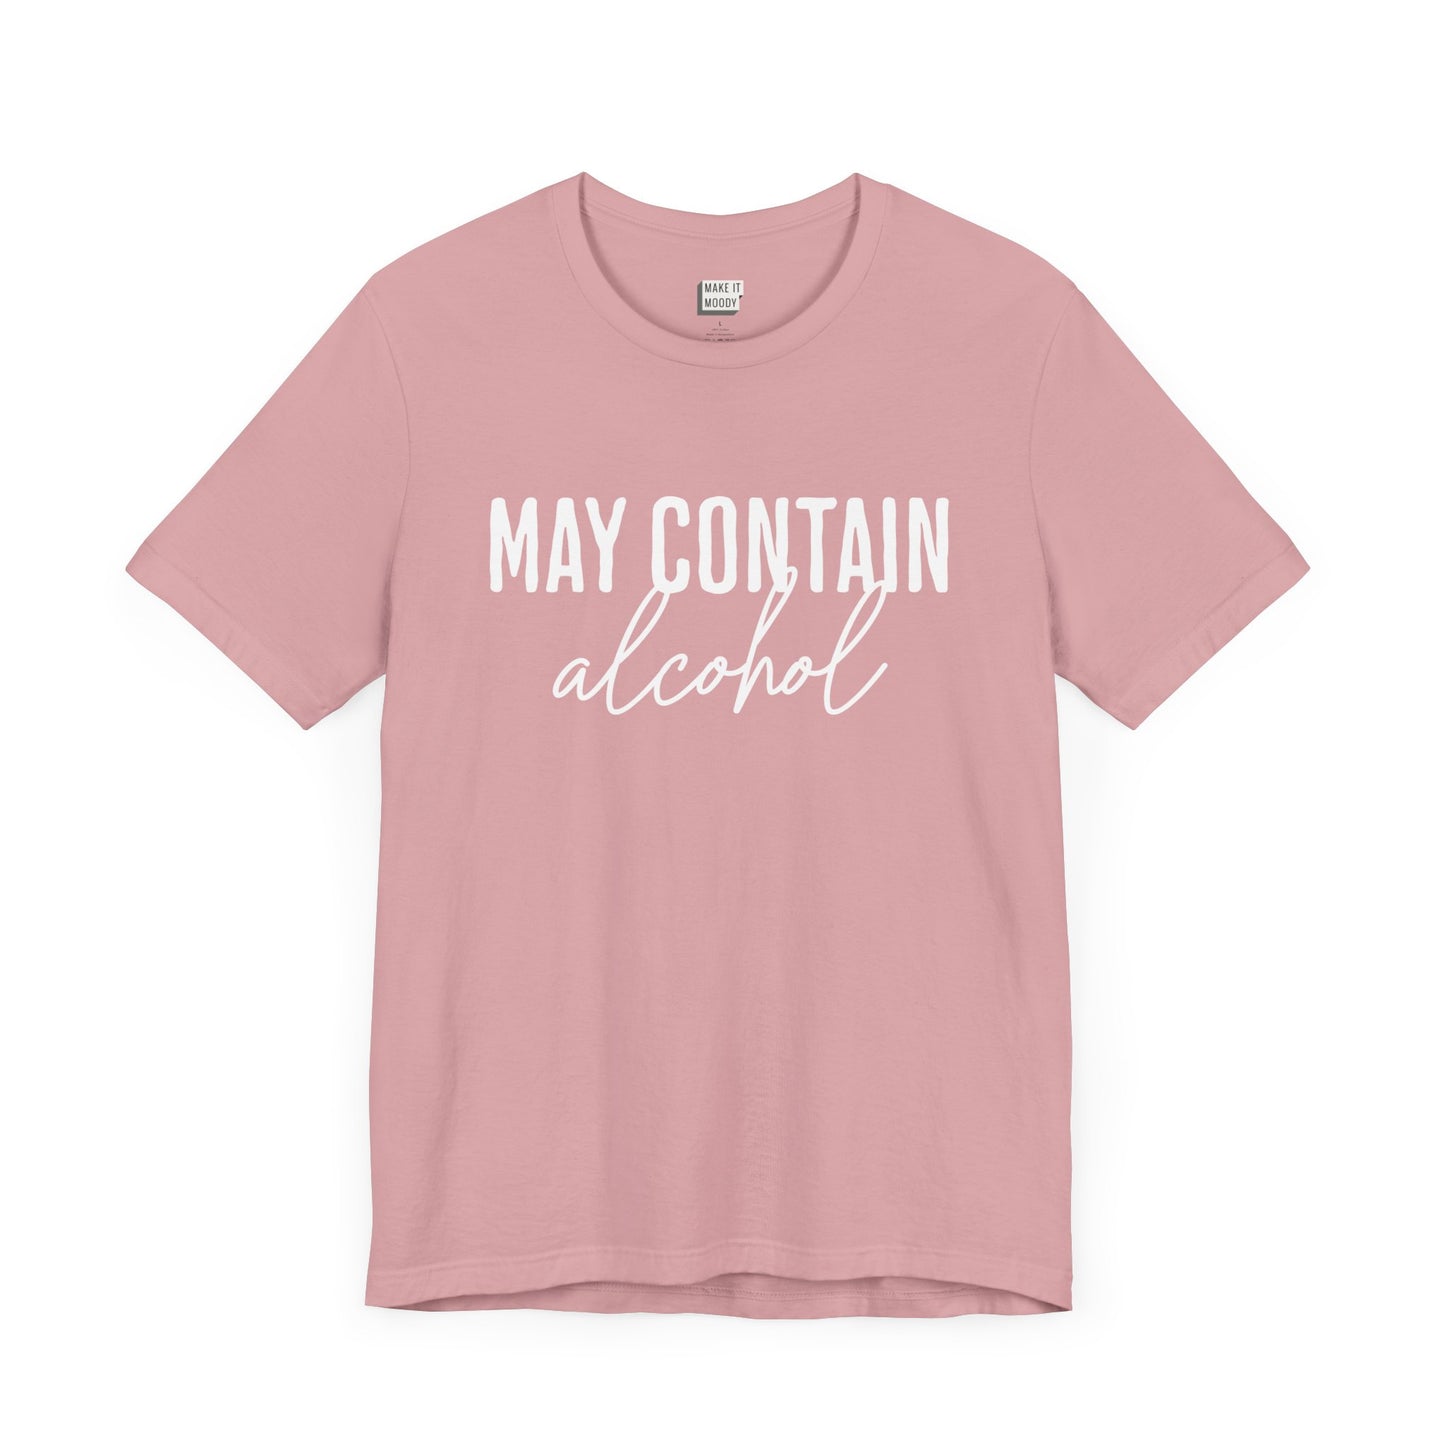 "May Contain Alcohol" Drinking Tee